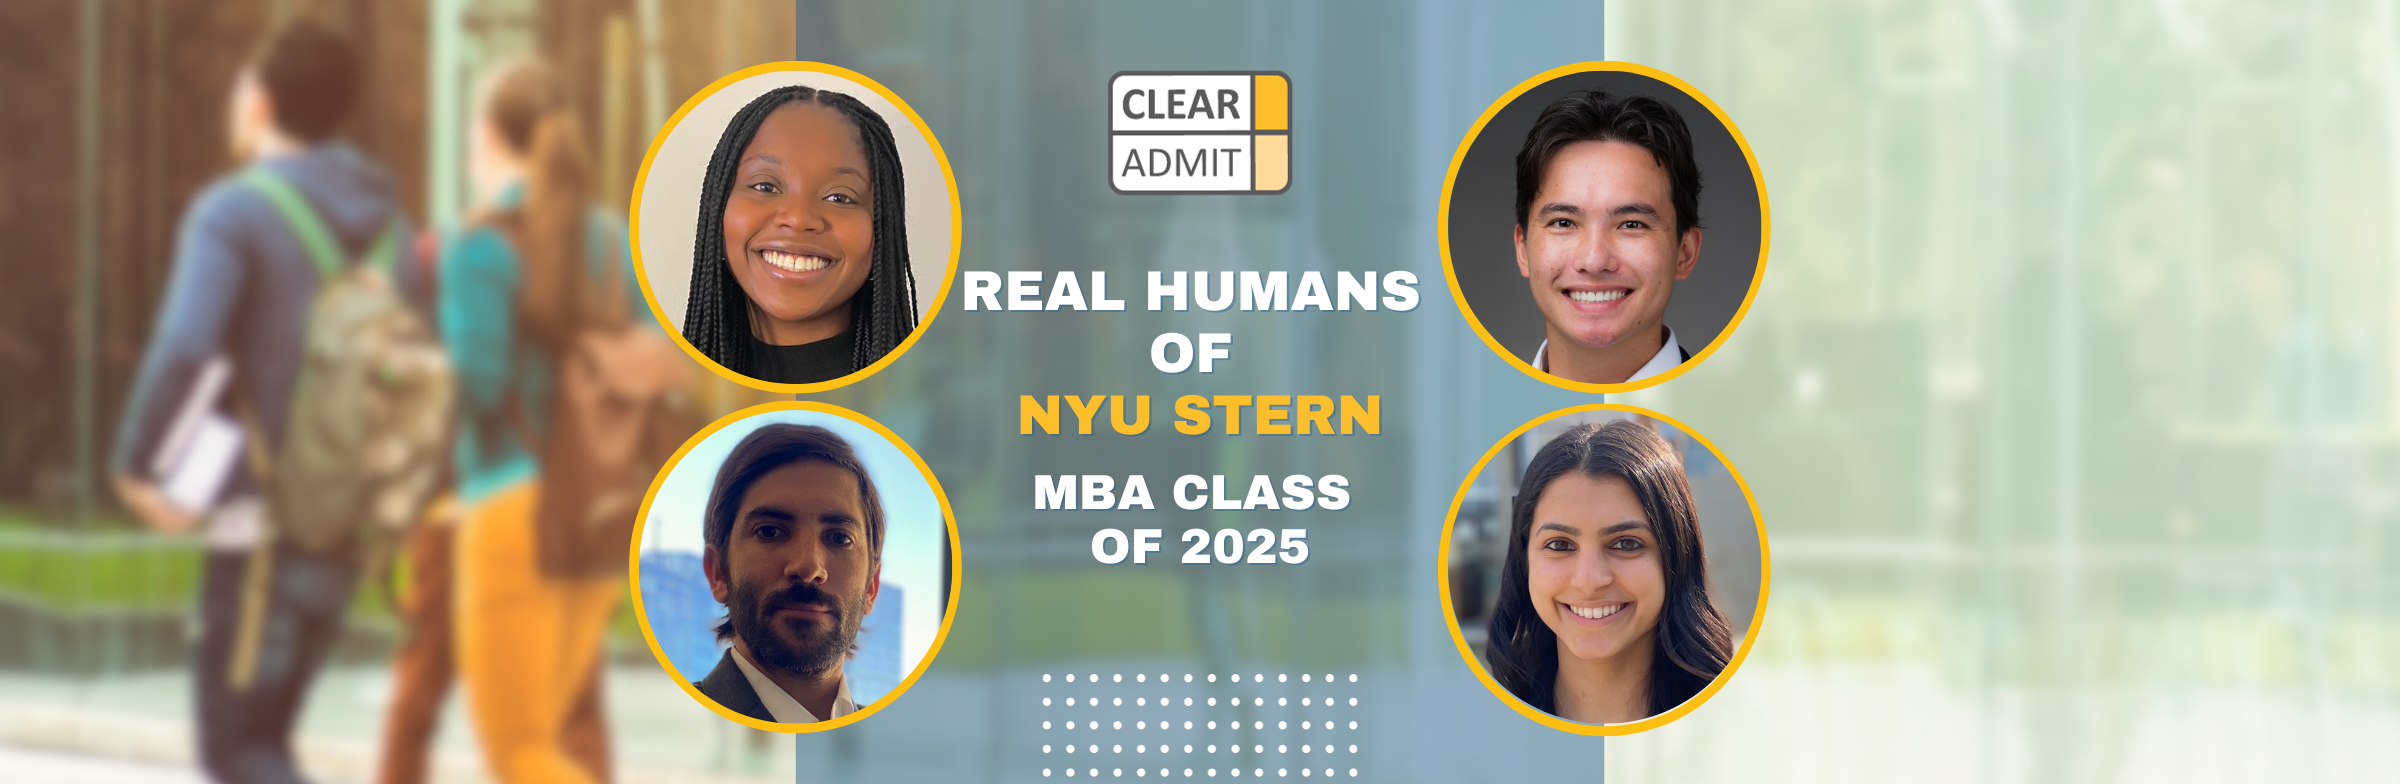 Image for Real Humans of the NYU Stern MBA Class of 2025